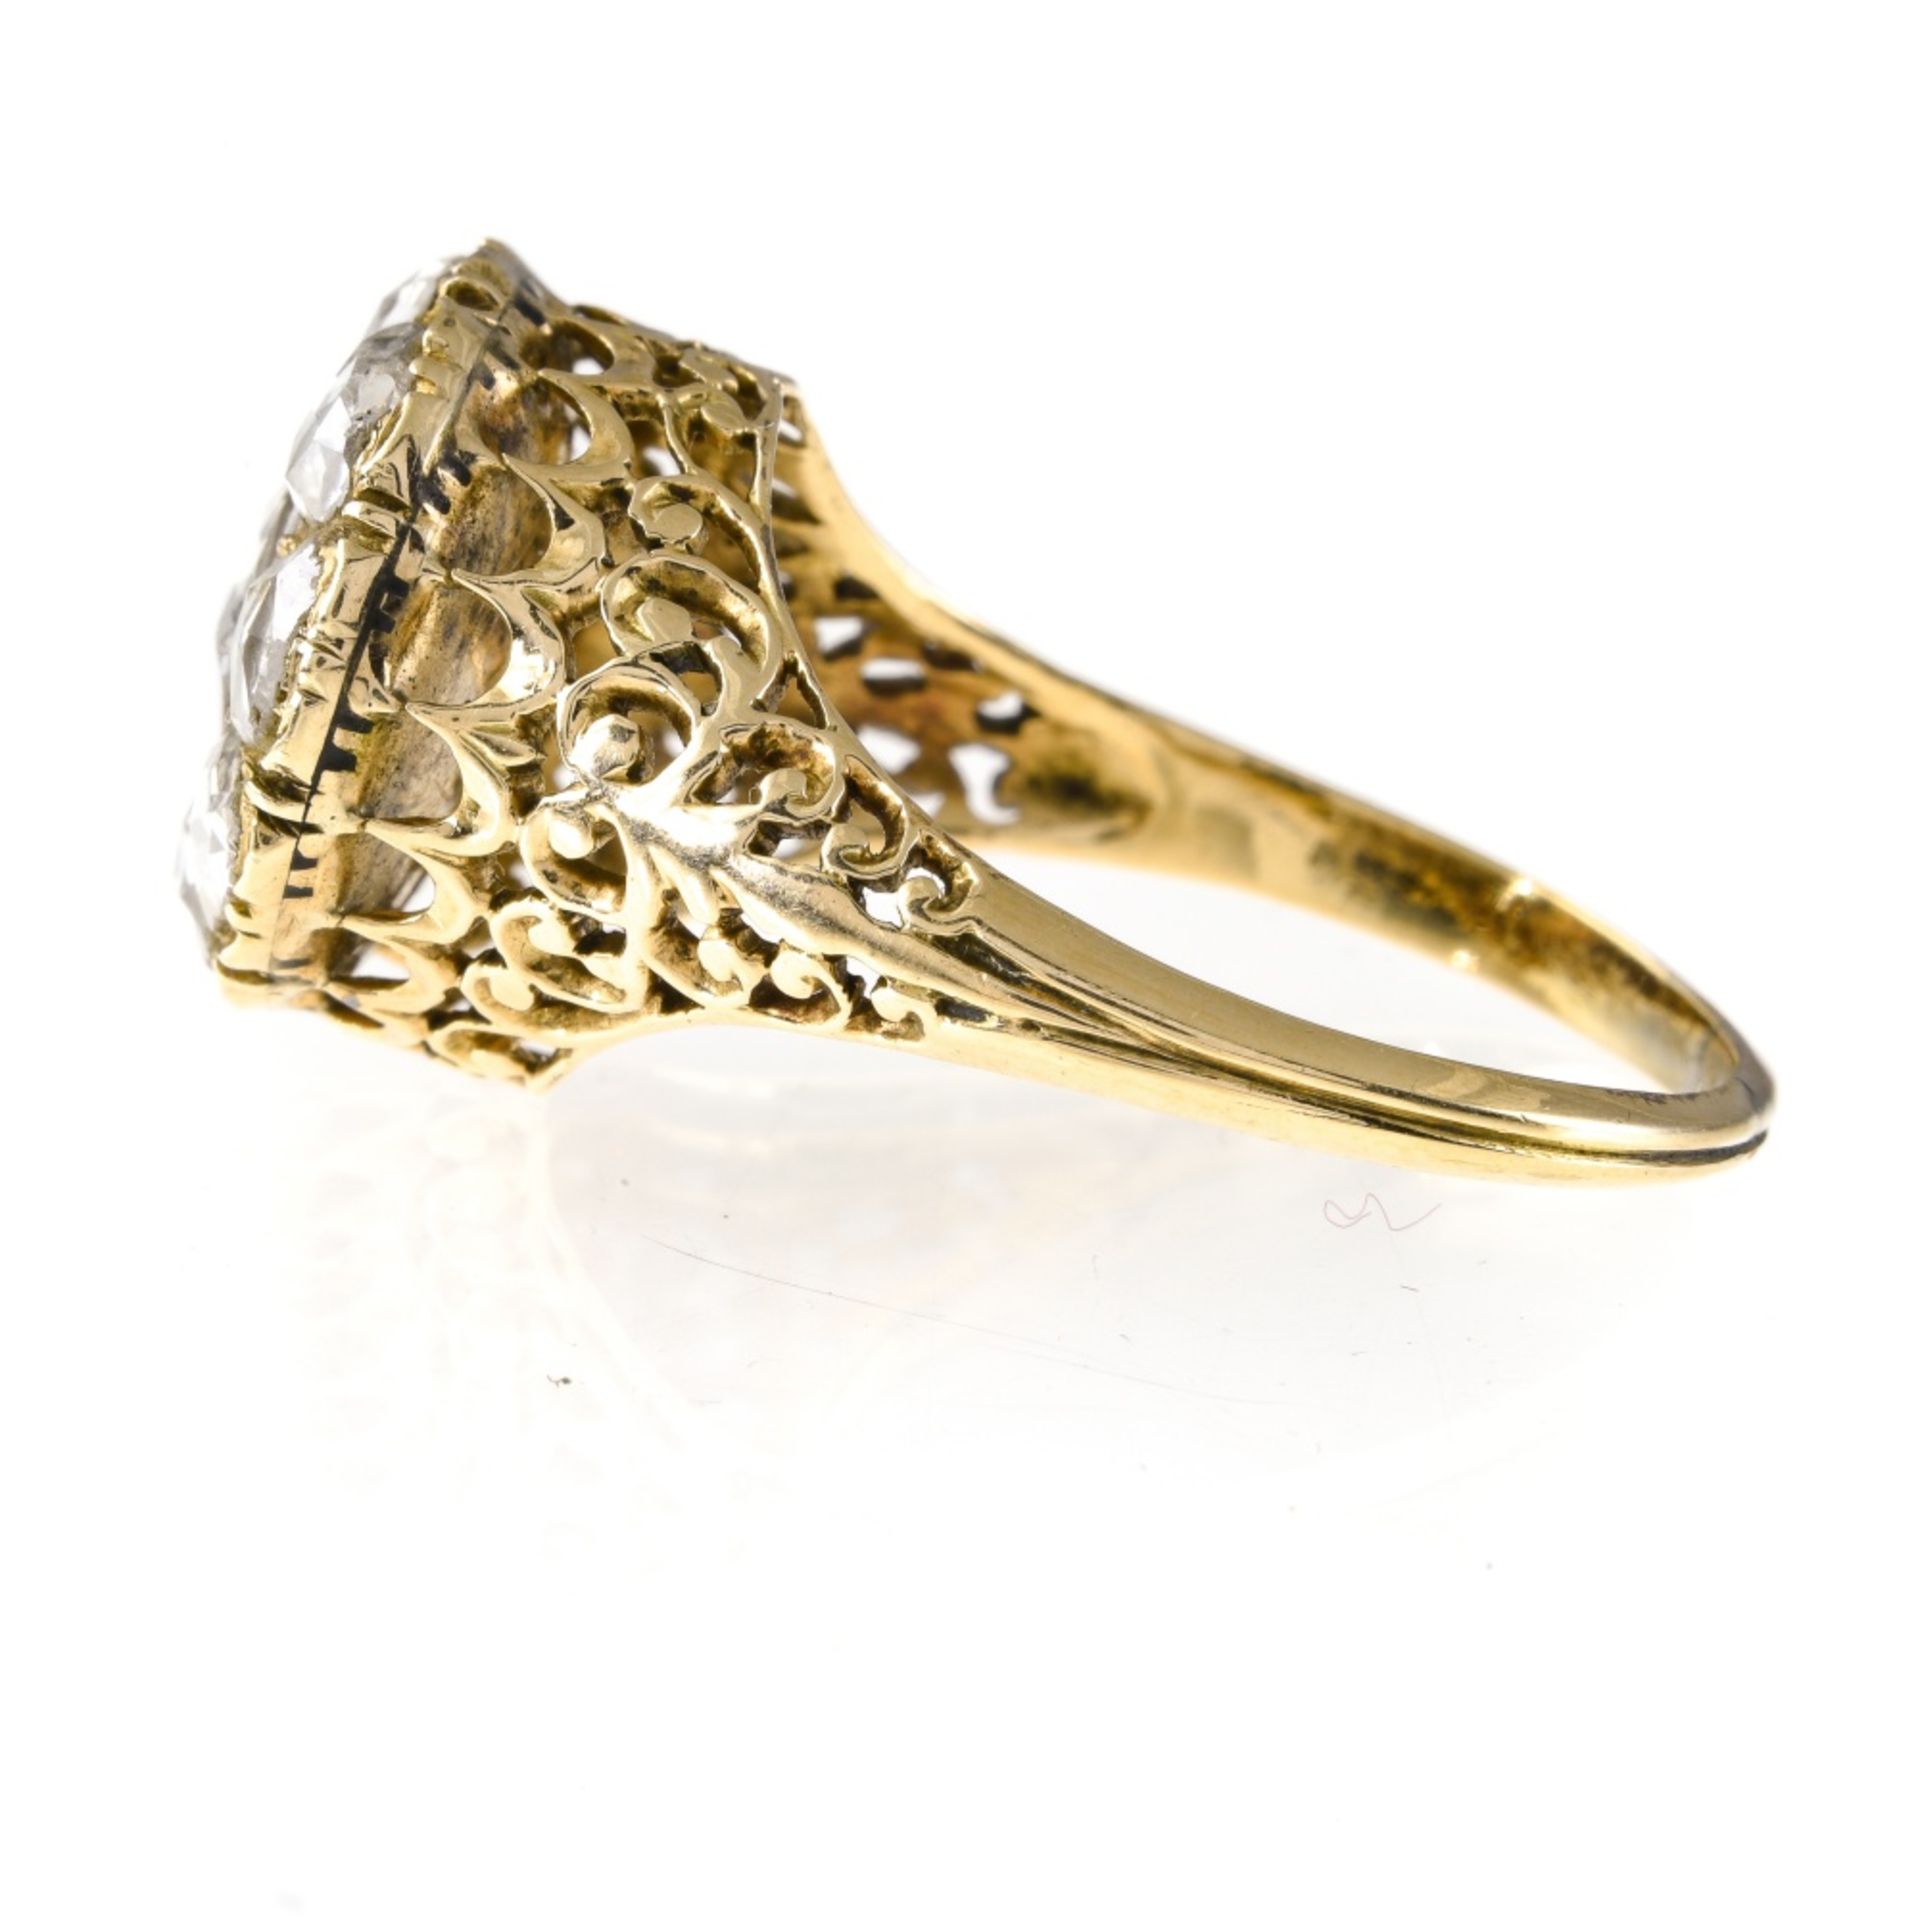 Rose-cut diamond ring 9 kt yellow gold, round, set with rose-cut diamonds. Late 19th century - Image 2 of 2